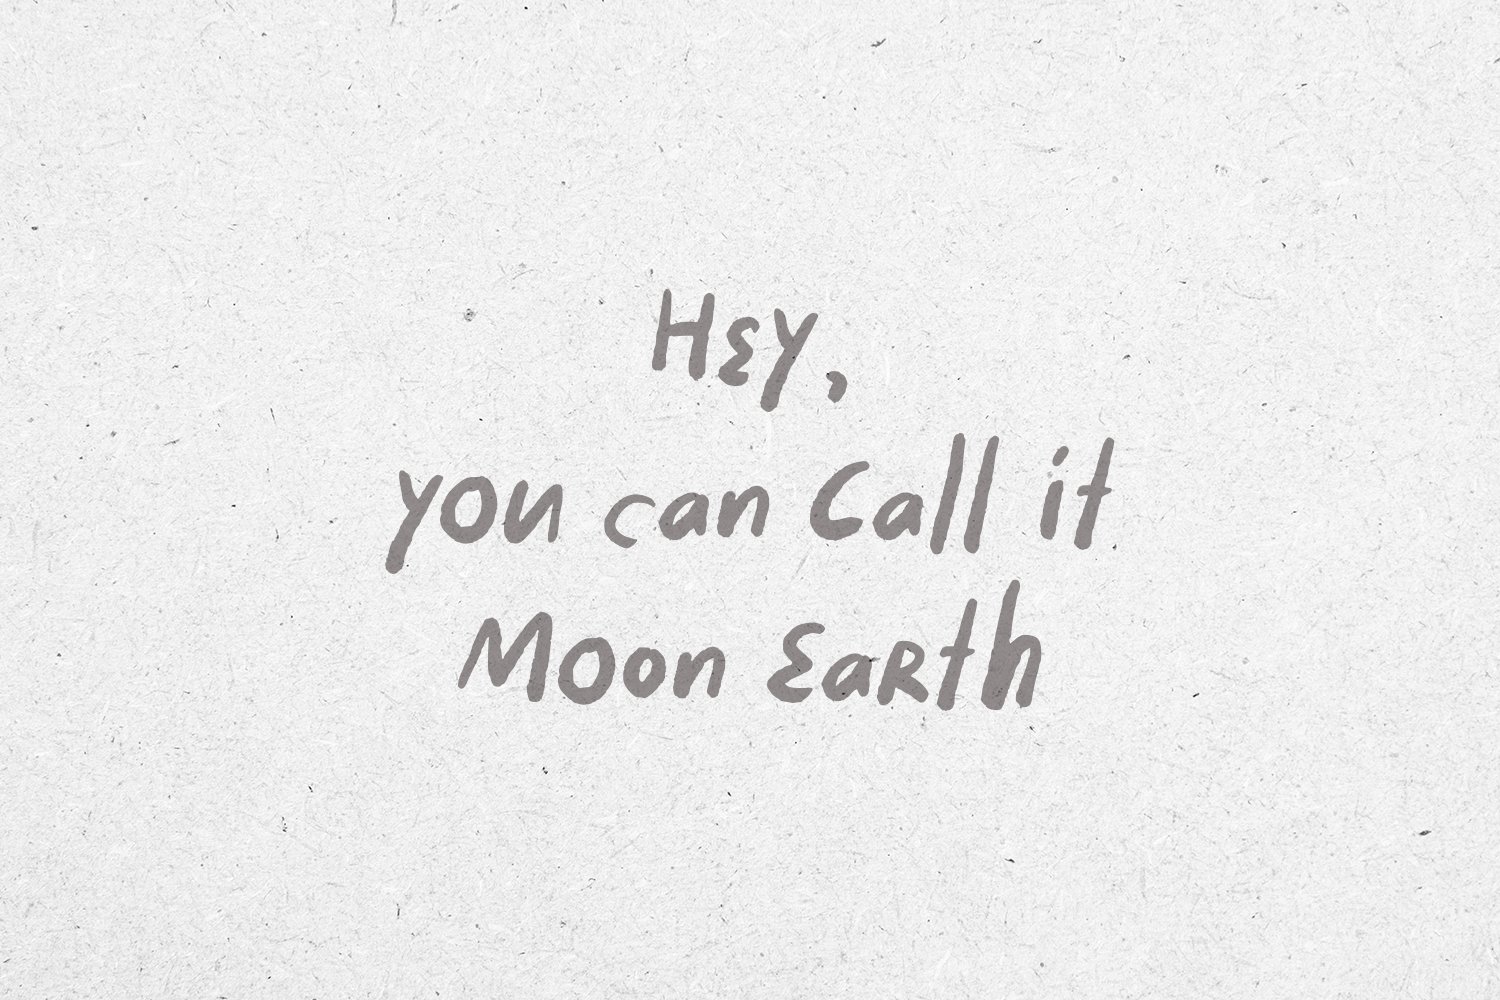 Moon Earth ~ A Cozy Handwritten cover image.